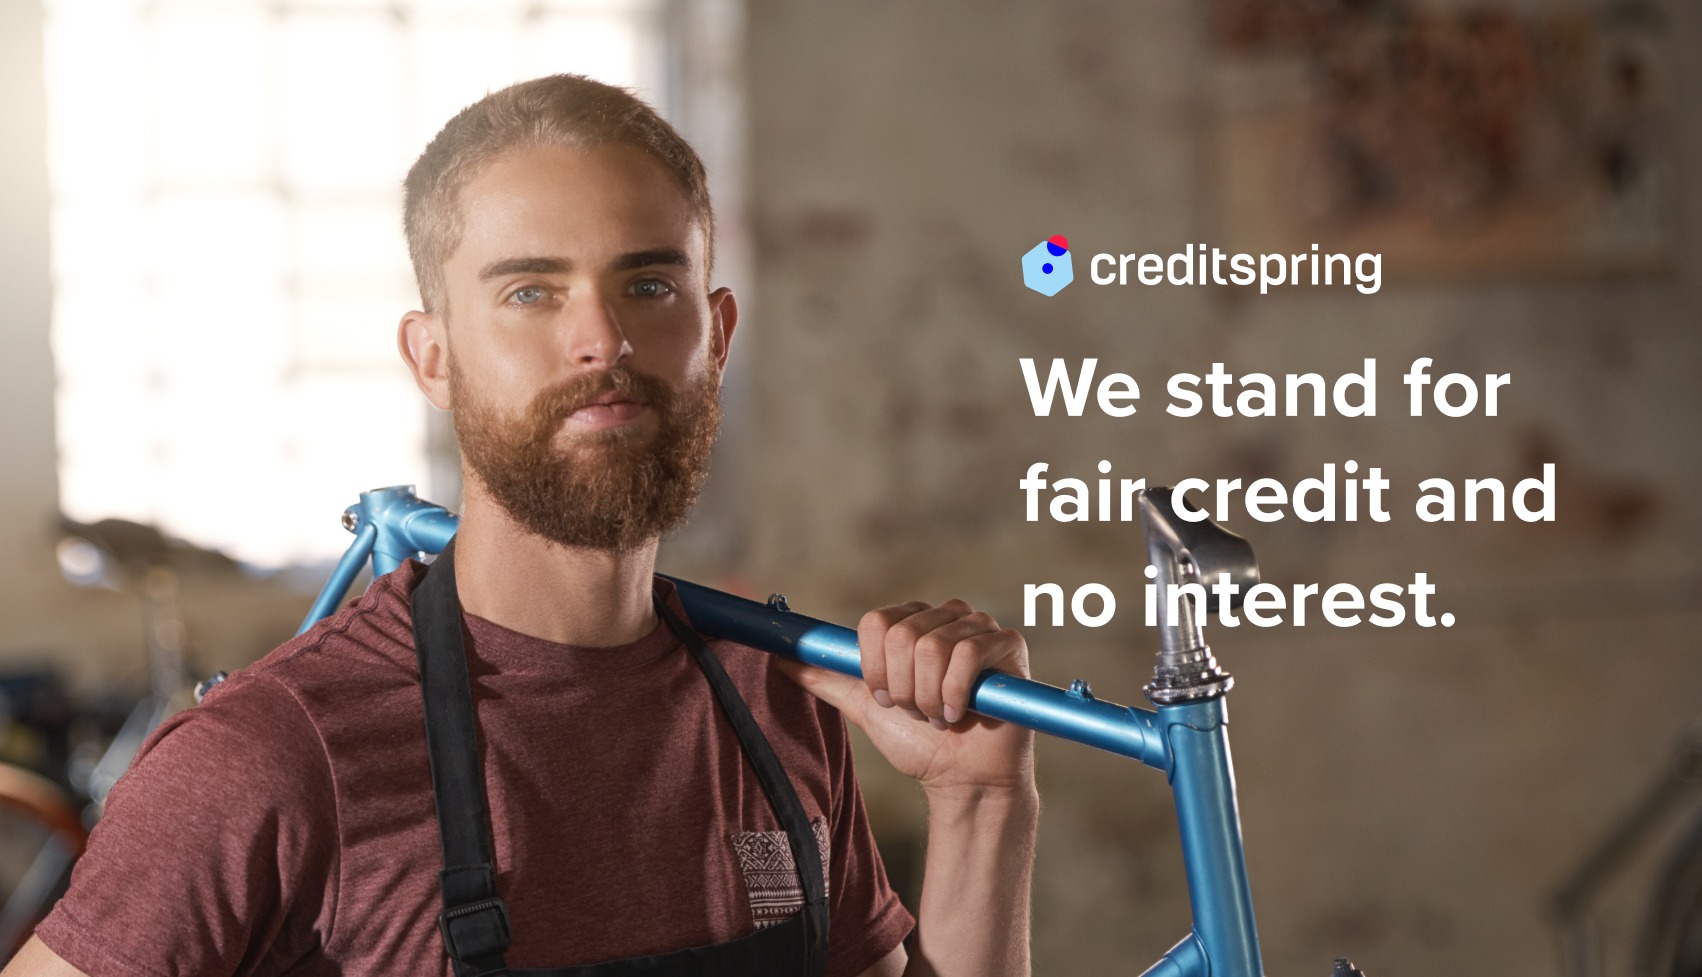 Creditspring raises £48 million to help make people’s life easier with its subscription finance service